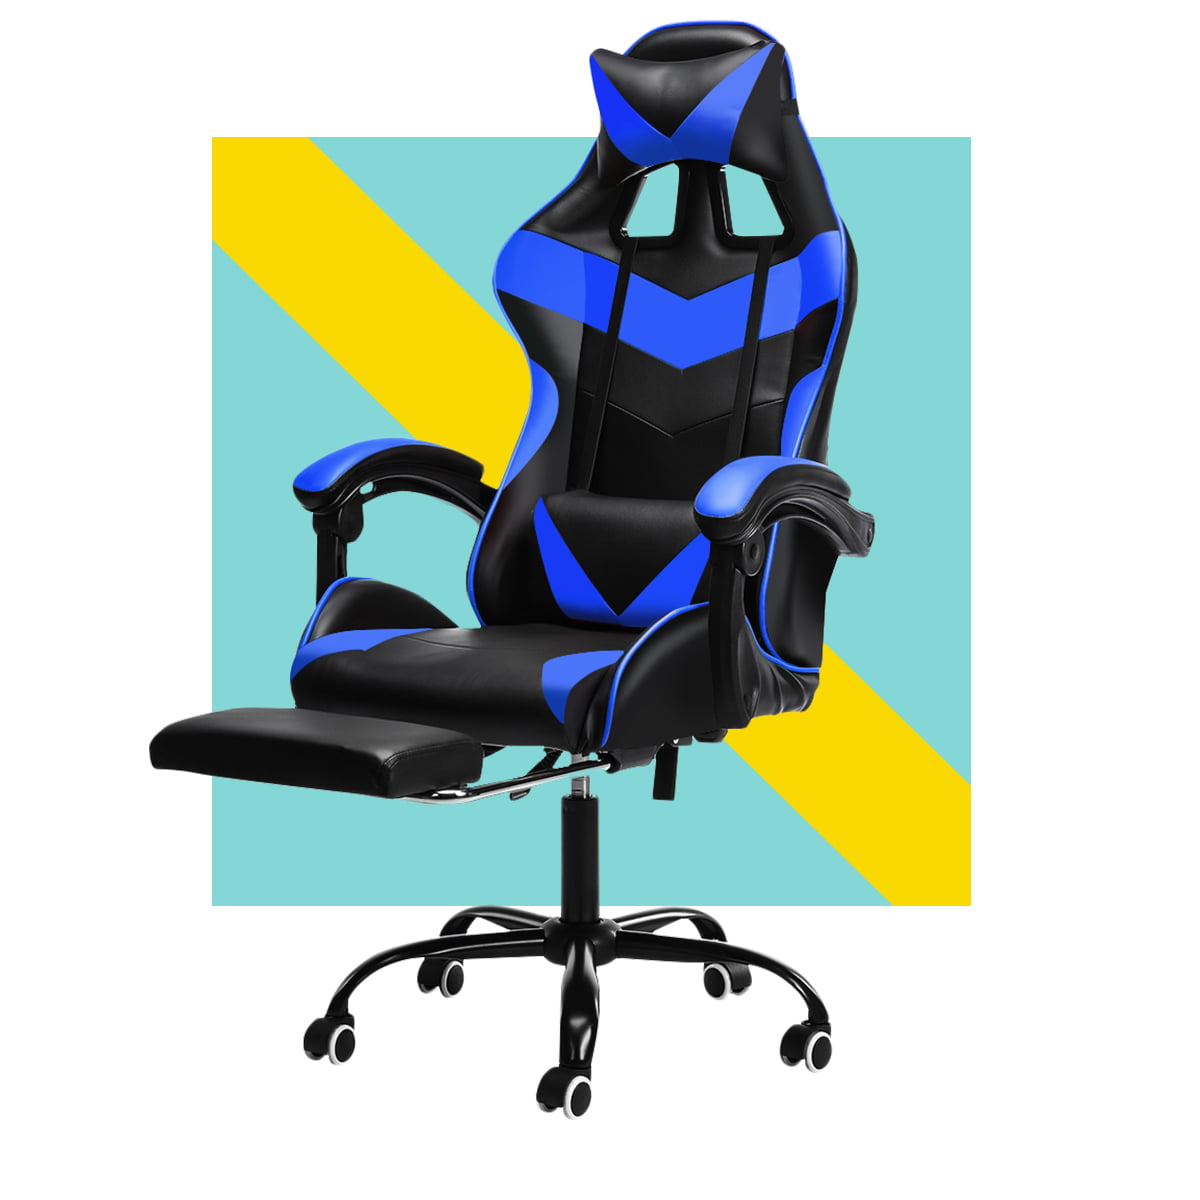 ch-AIR Game Chair Computer Chair Ergonomics Executive Desk Chair Adjustable Height E-Sports Gamer Chairs Linkage Armrest Reclining Video Game Chair Bearing Capacity 330 Pounds Athletic Chair 